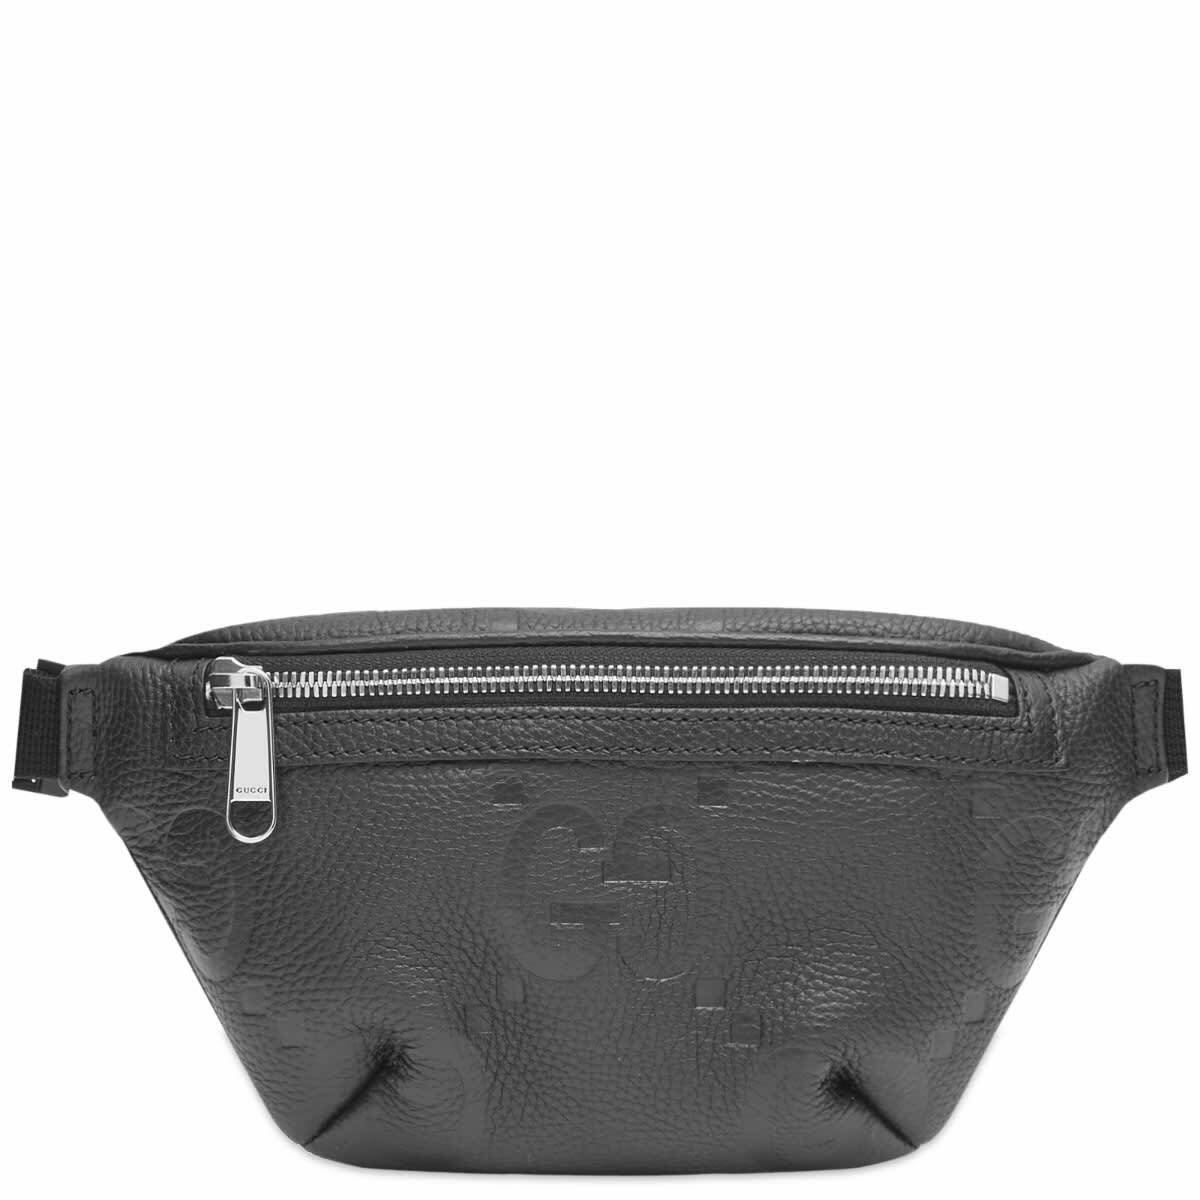 Embossed GG Leather Waist Bag in Black Gucci